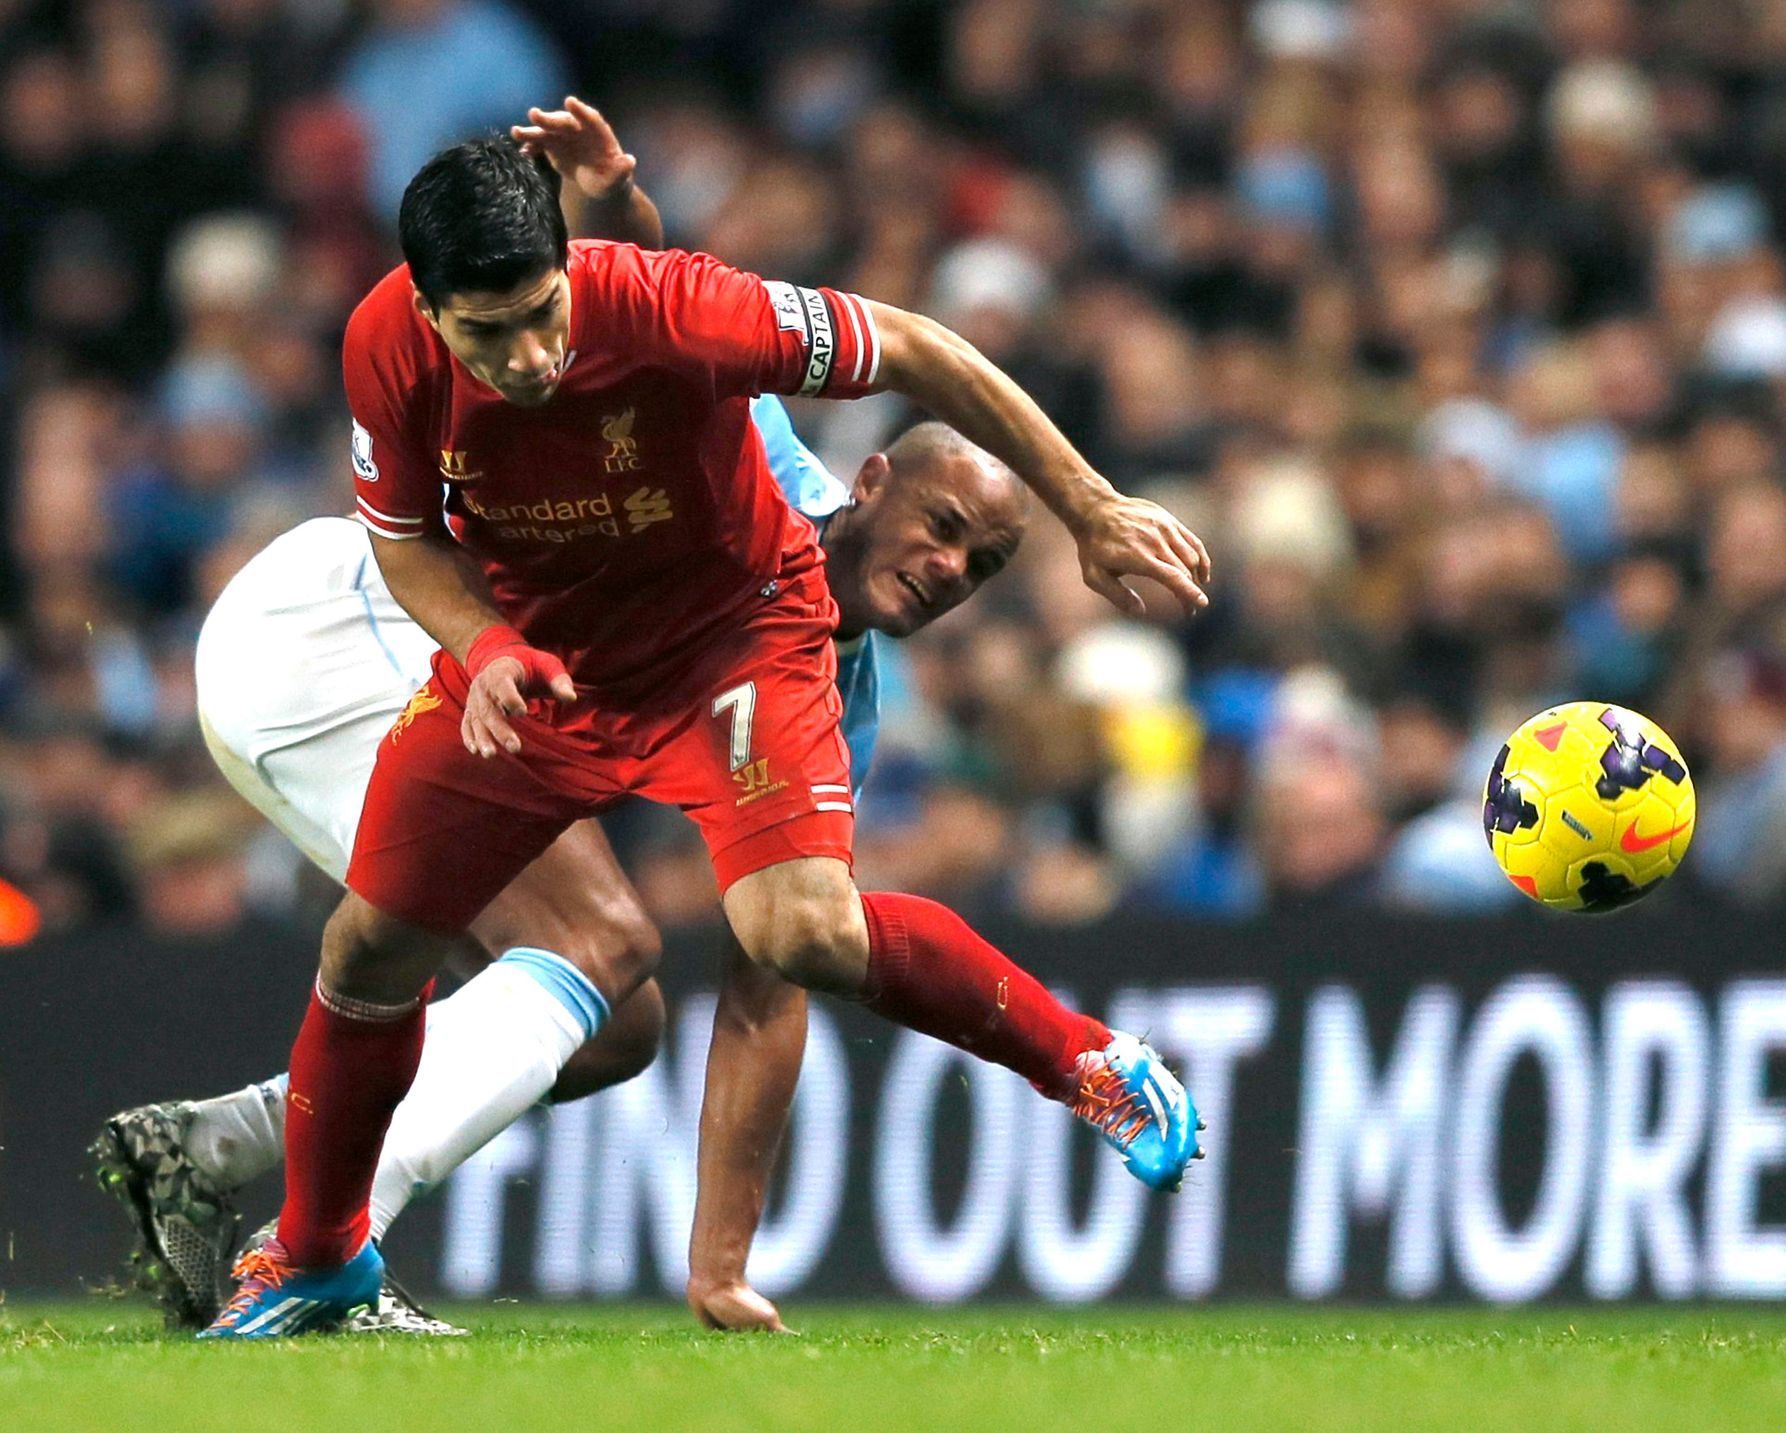 Liverpool's Suarez challenges Manchester City's Kompany during their English Premier League soccer match in Manchester